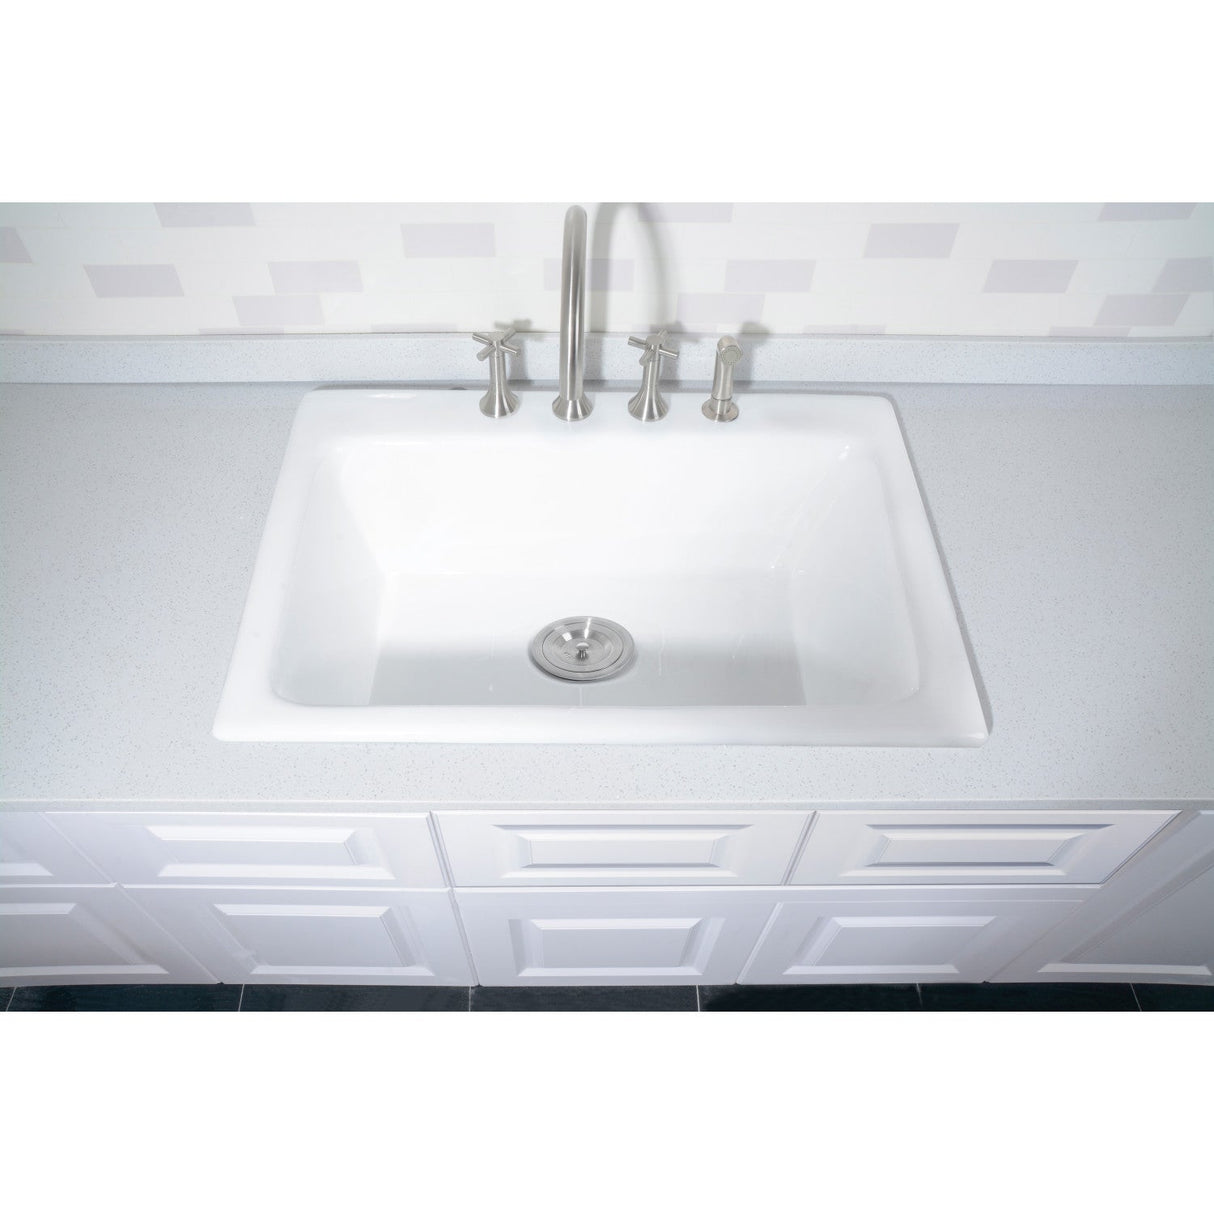 Towne GT252294 25-Inch Cast Iron Self-Rimming 4-Hole Single Bowl Drop-In Kitchen Sink, White